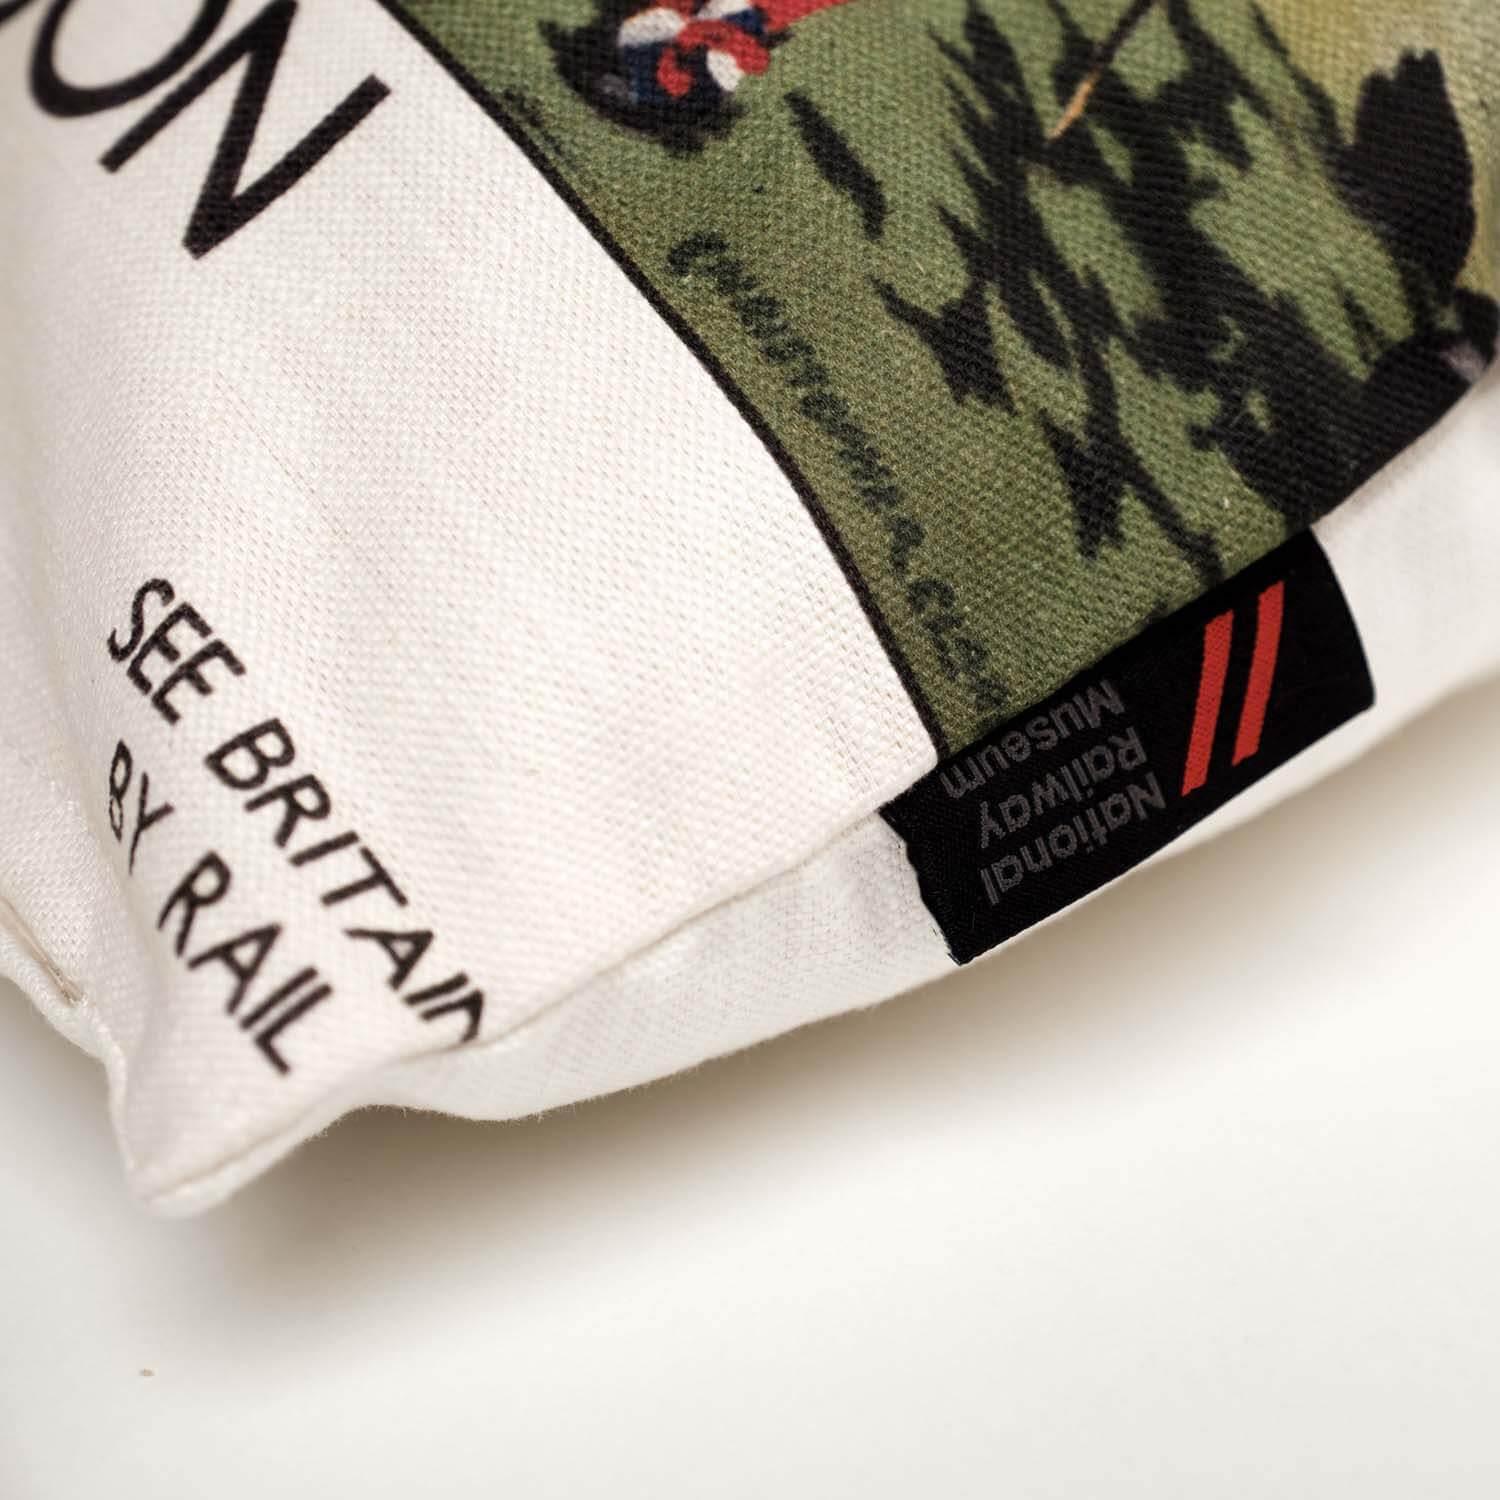 Shap Fell - The Route of the Royal Scot' LMS 1925 - National Railway Museum Cushion - Handmade Cushions UK - WeLoveCushions